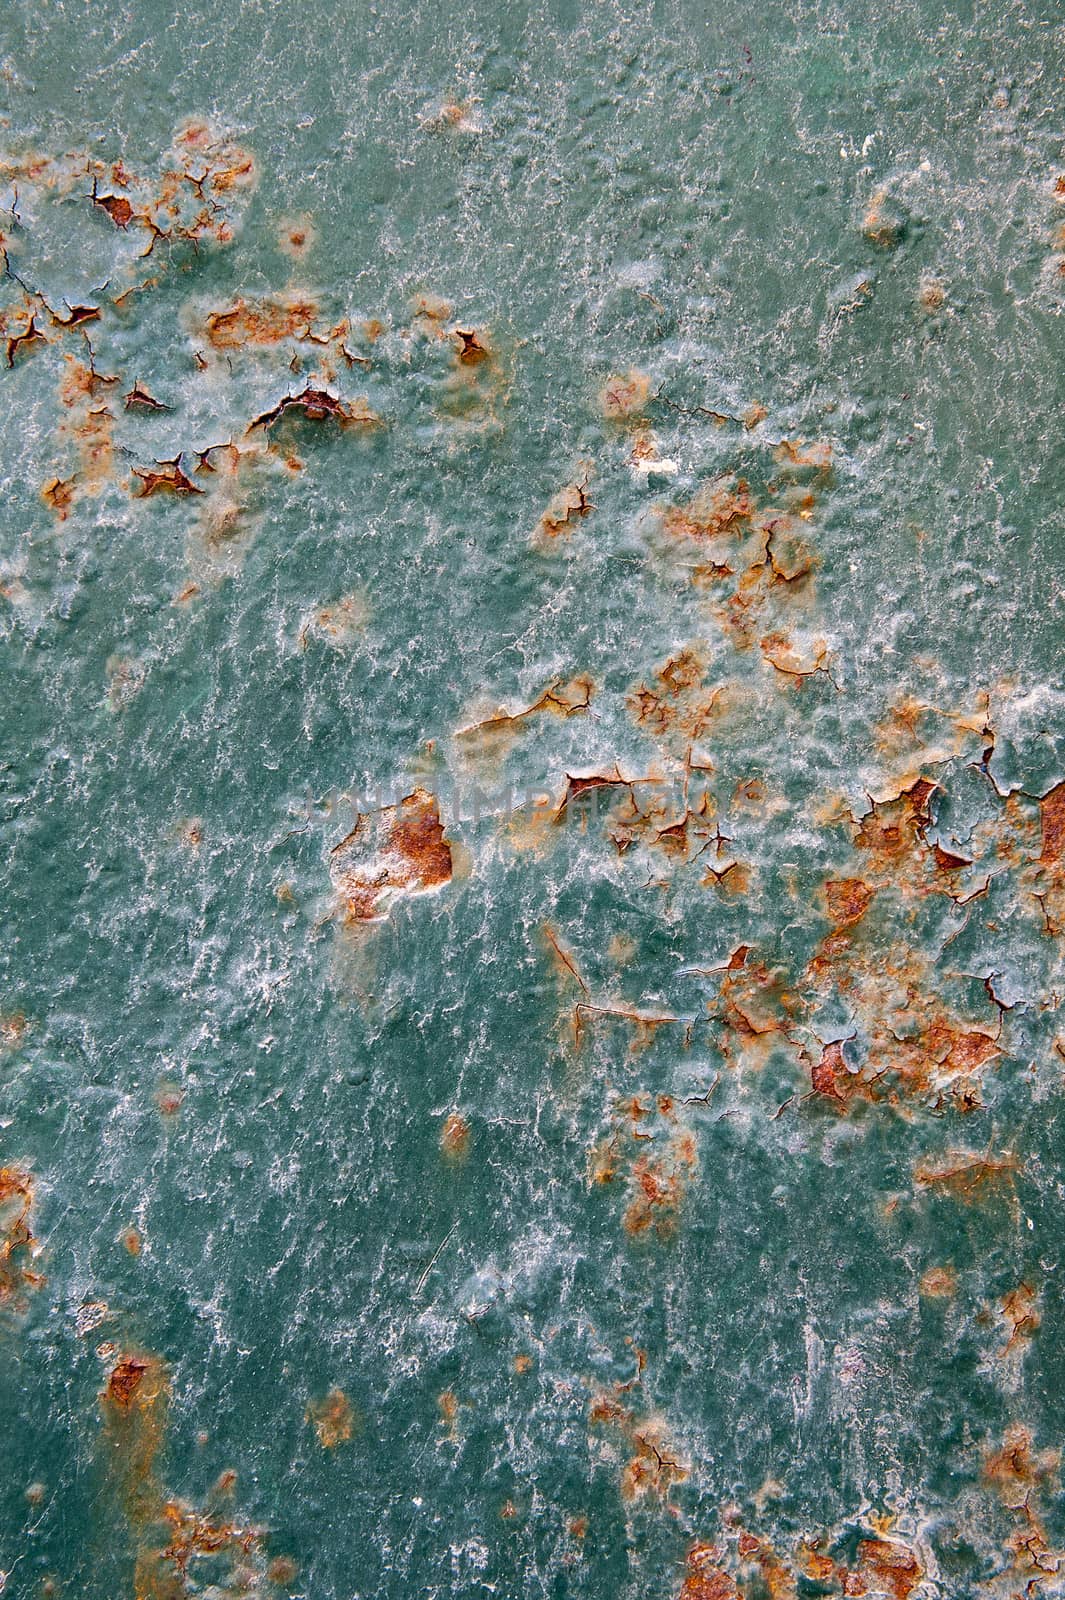 Abstract textured rust metal surface background